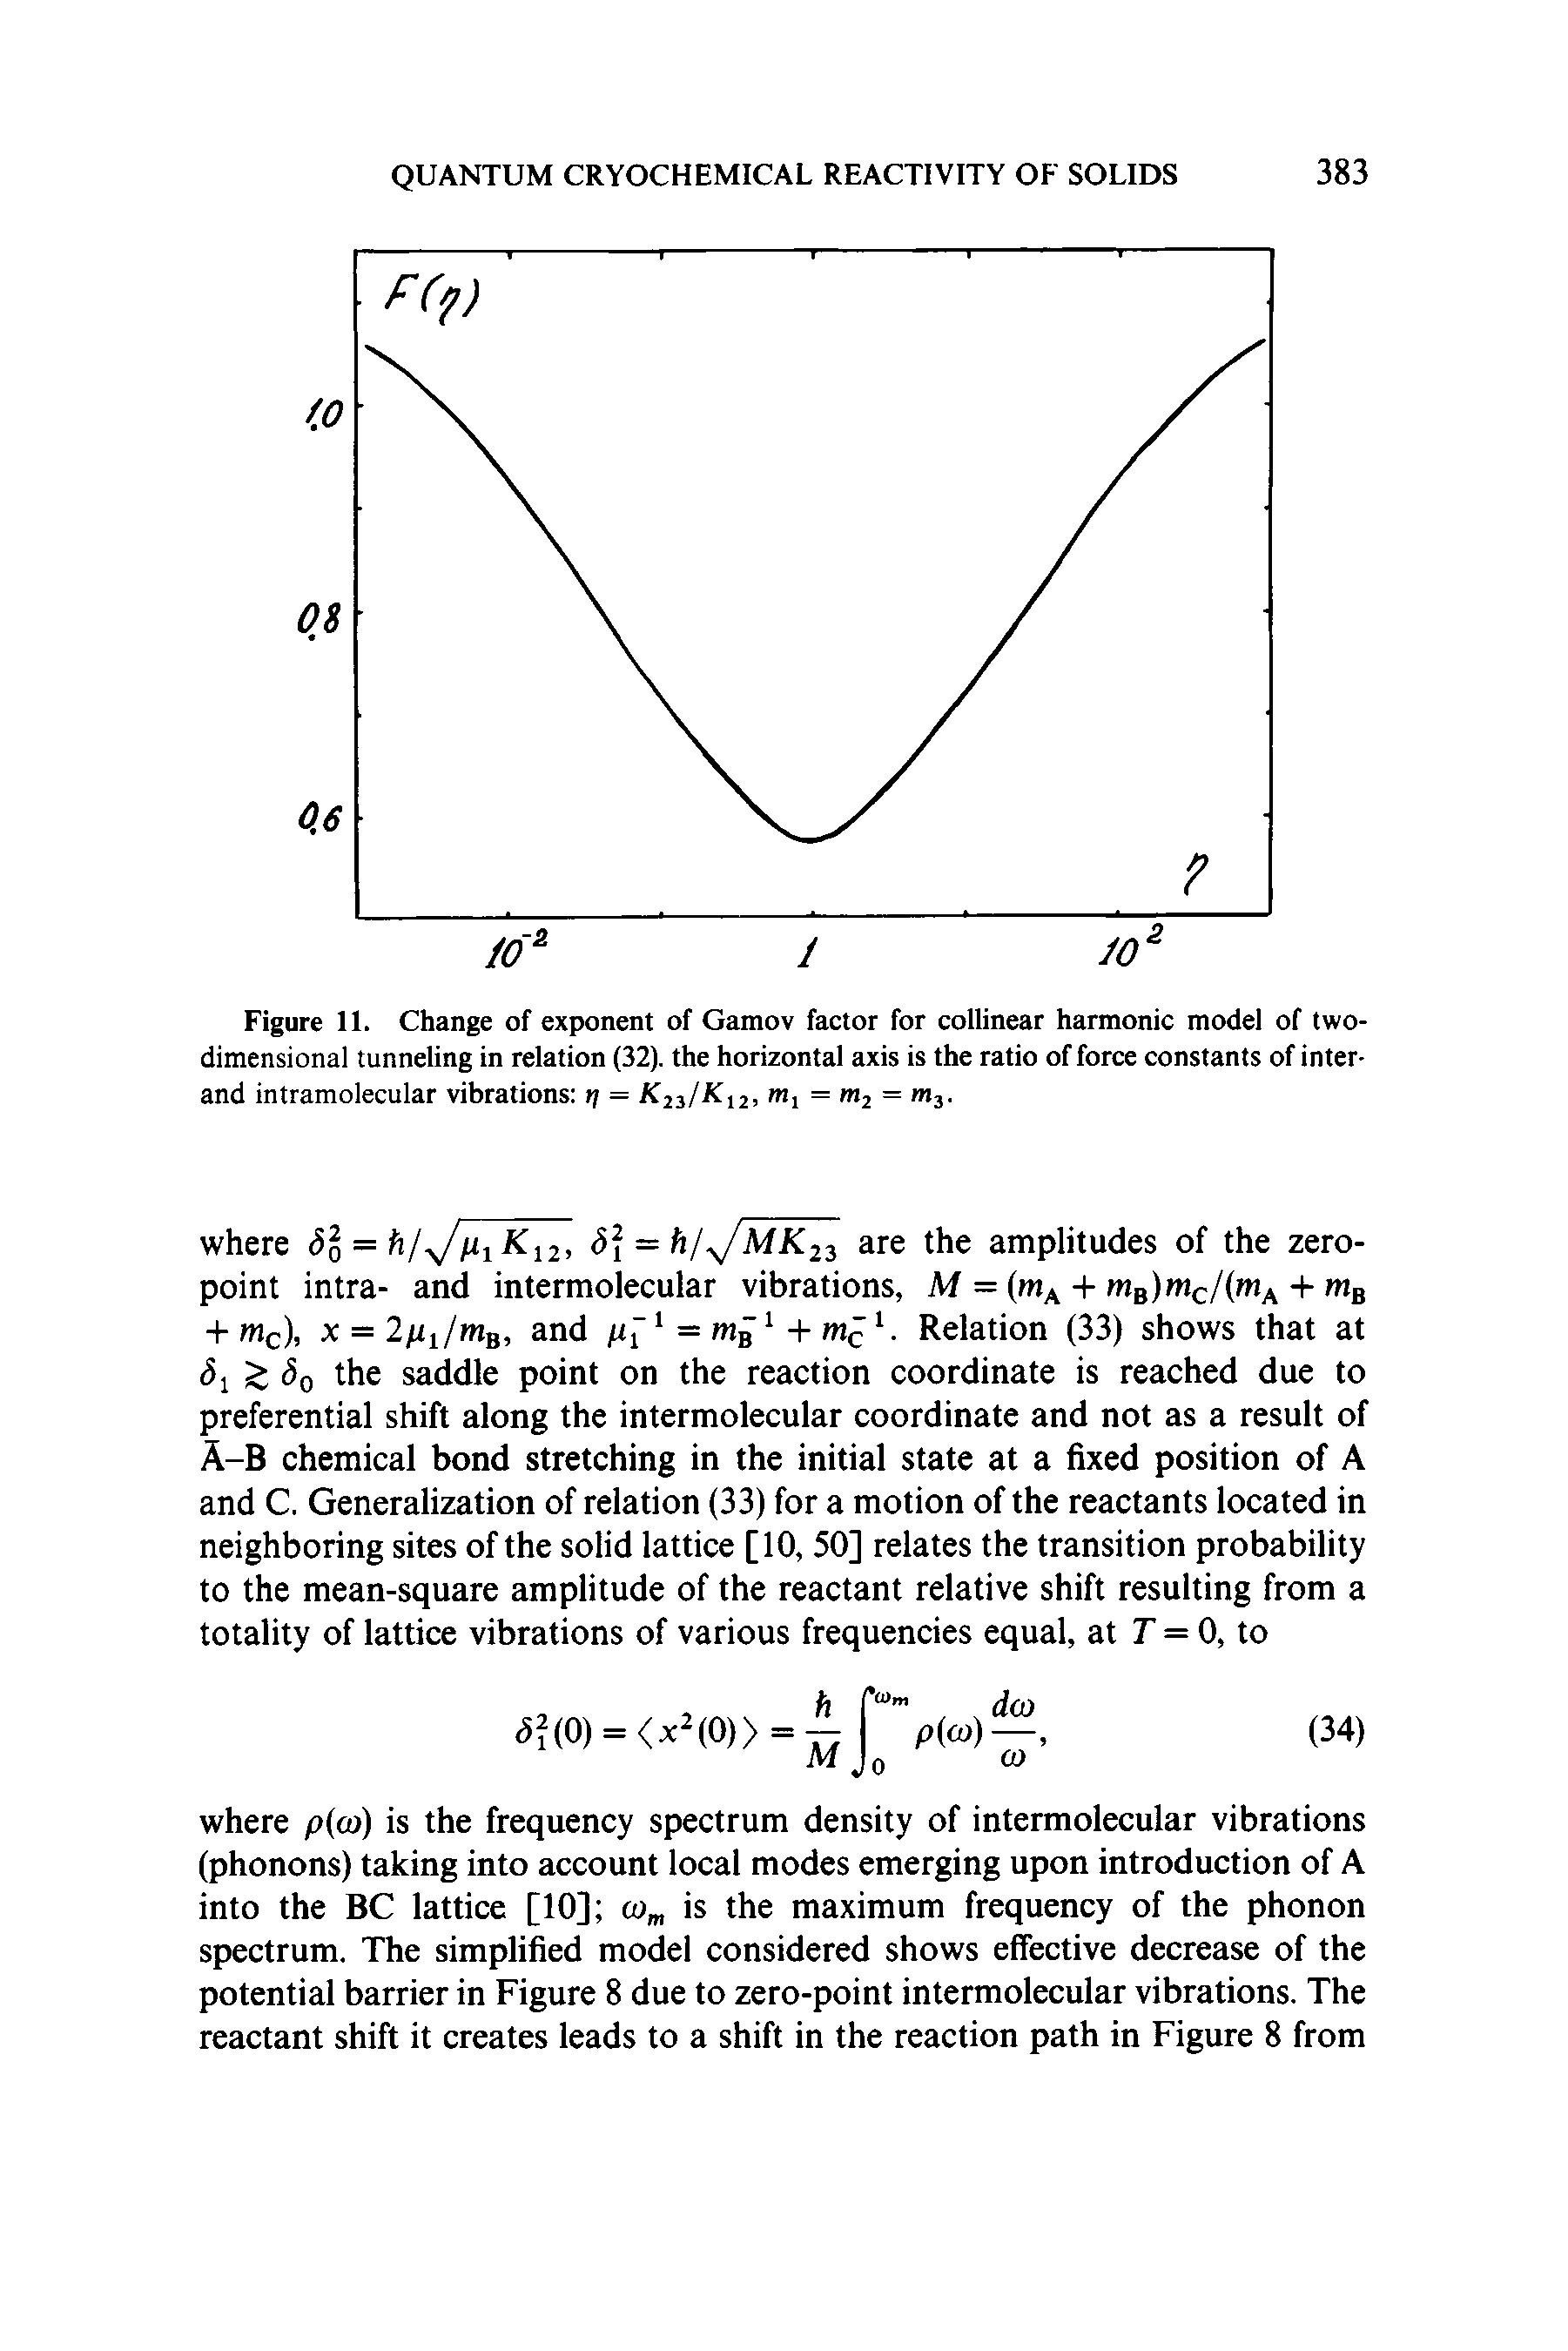 Figure 11. Change of exponent of Gamov factor for collinear harmonic model of two-dimensional tunneling in relation (32). the horizontal axis is the ratio of force constants of inter-and intramolecular vibrations tj = K23/Ki2, — m2 = m3.